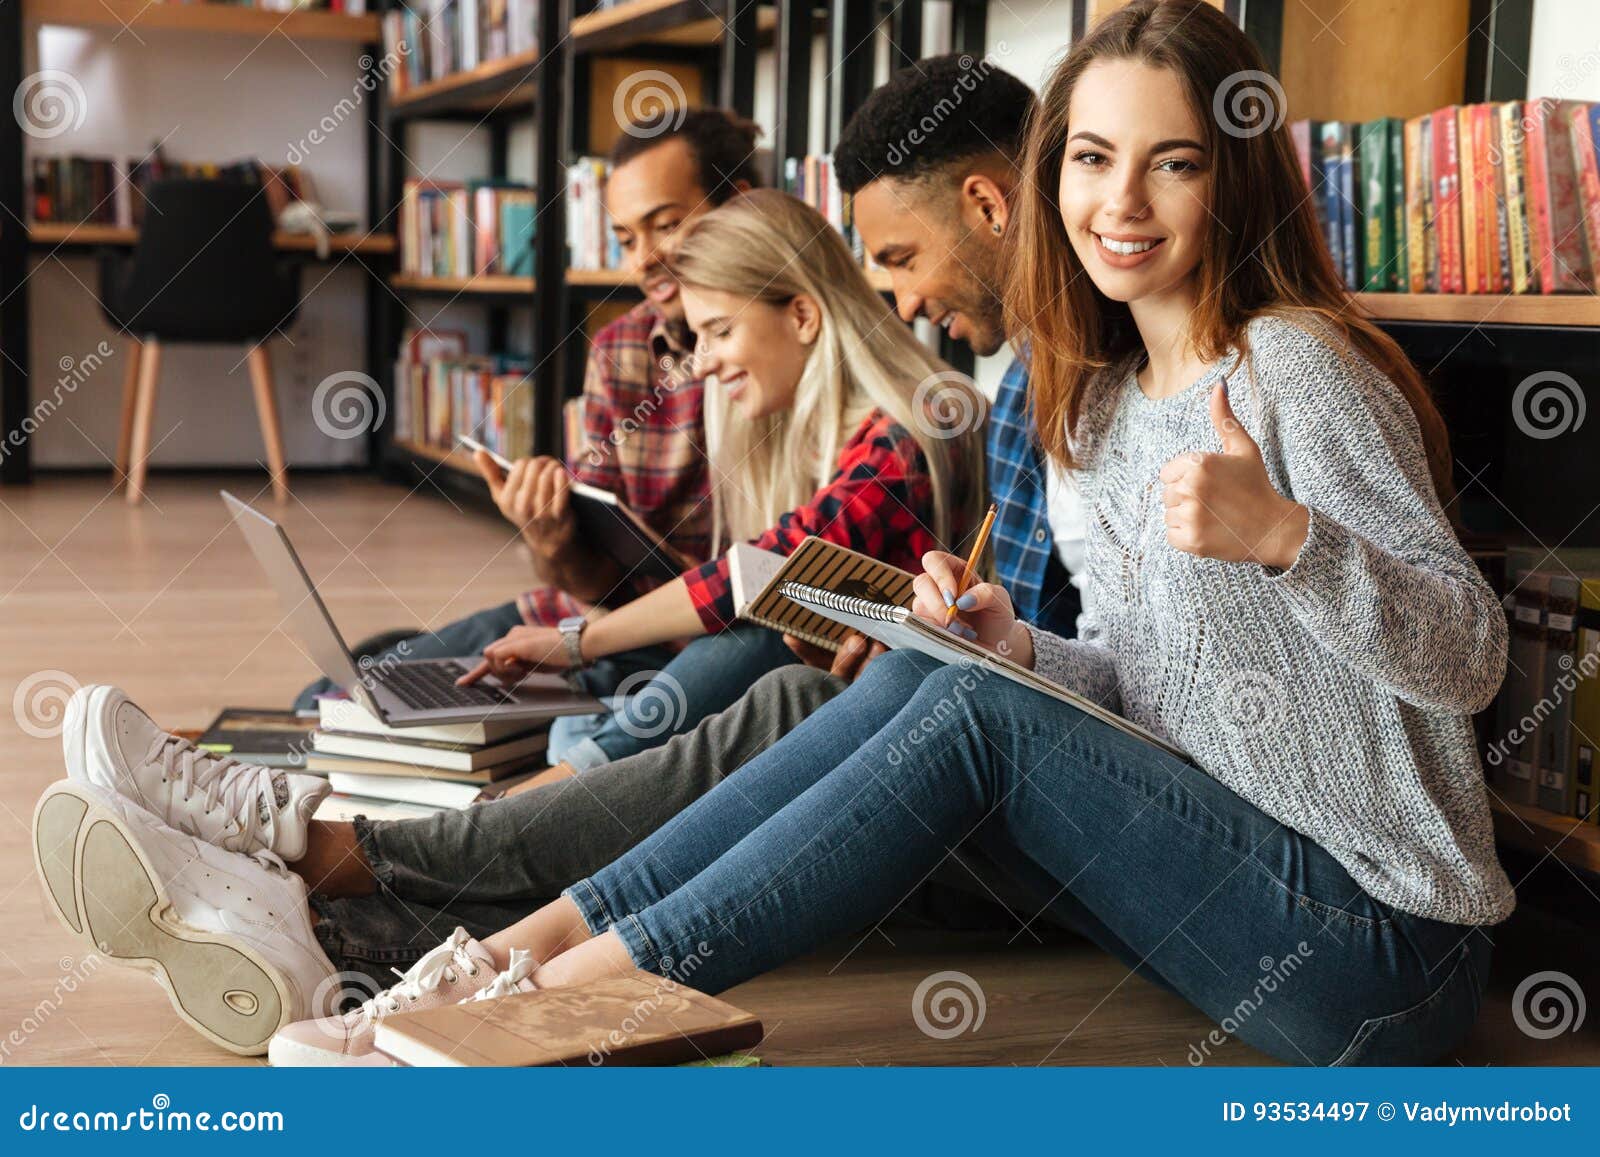 Students Sitting in Library on Floor Showing Thumbs Up